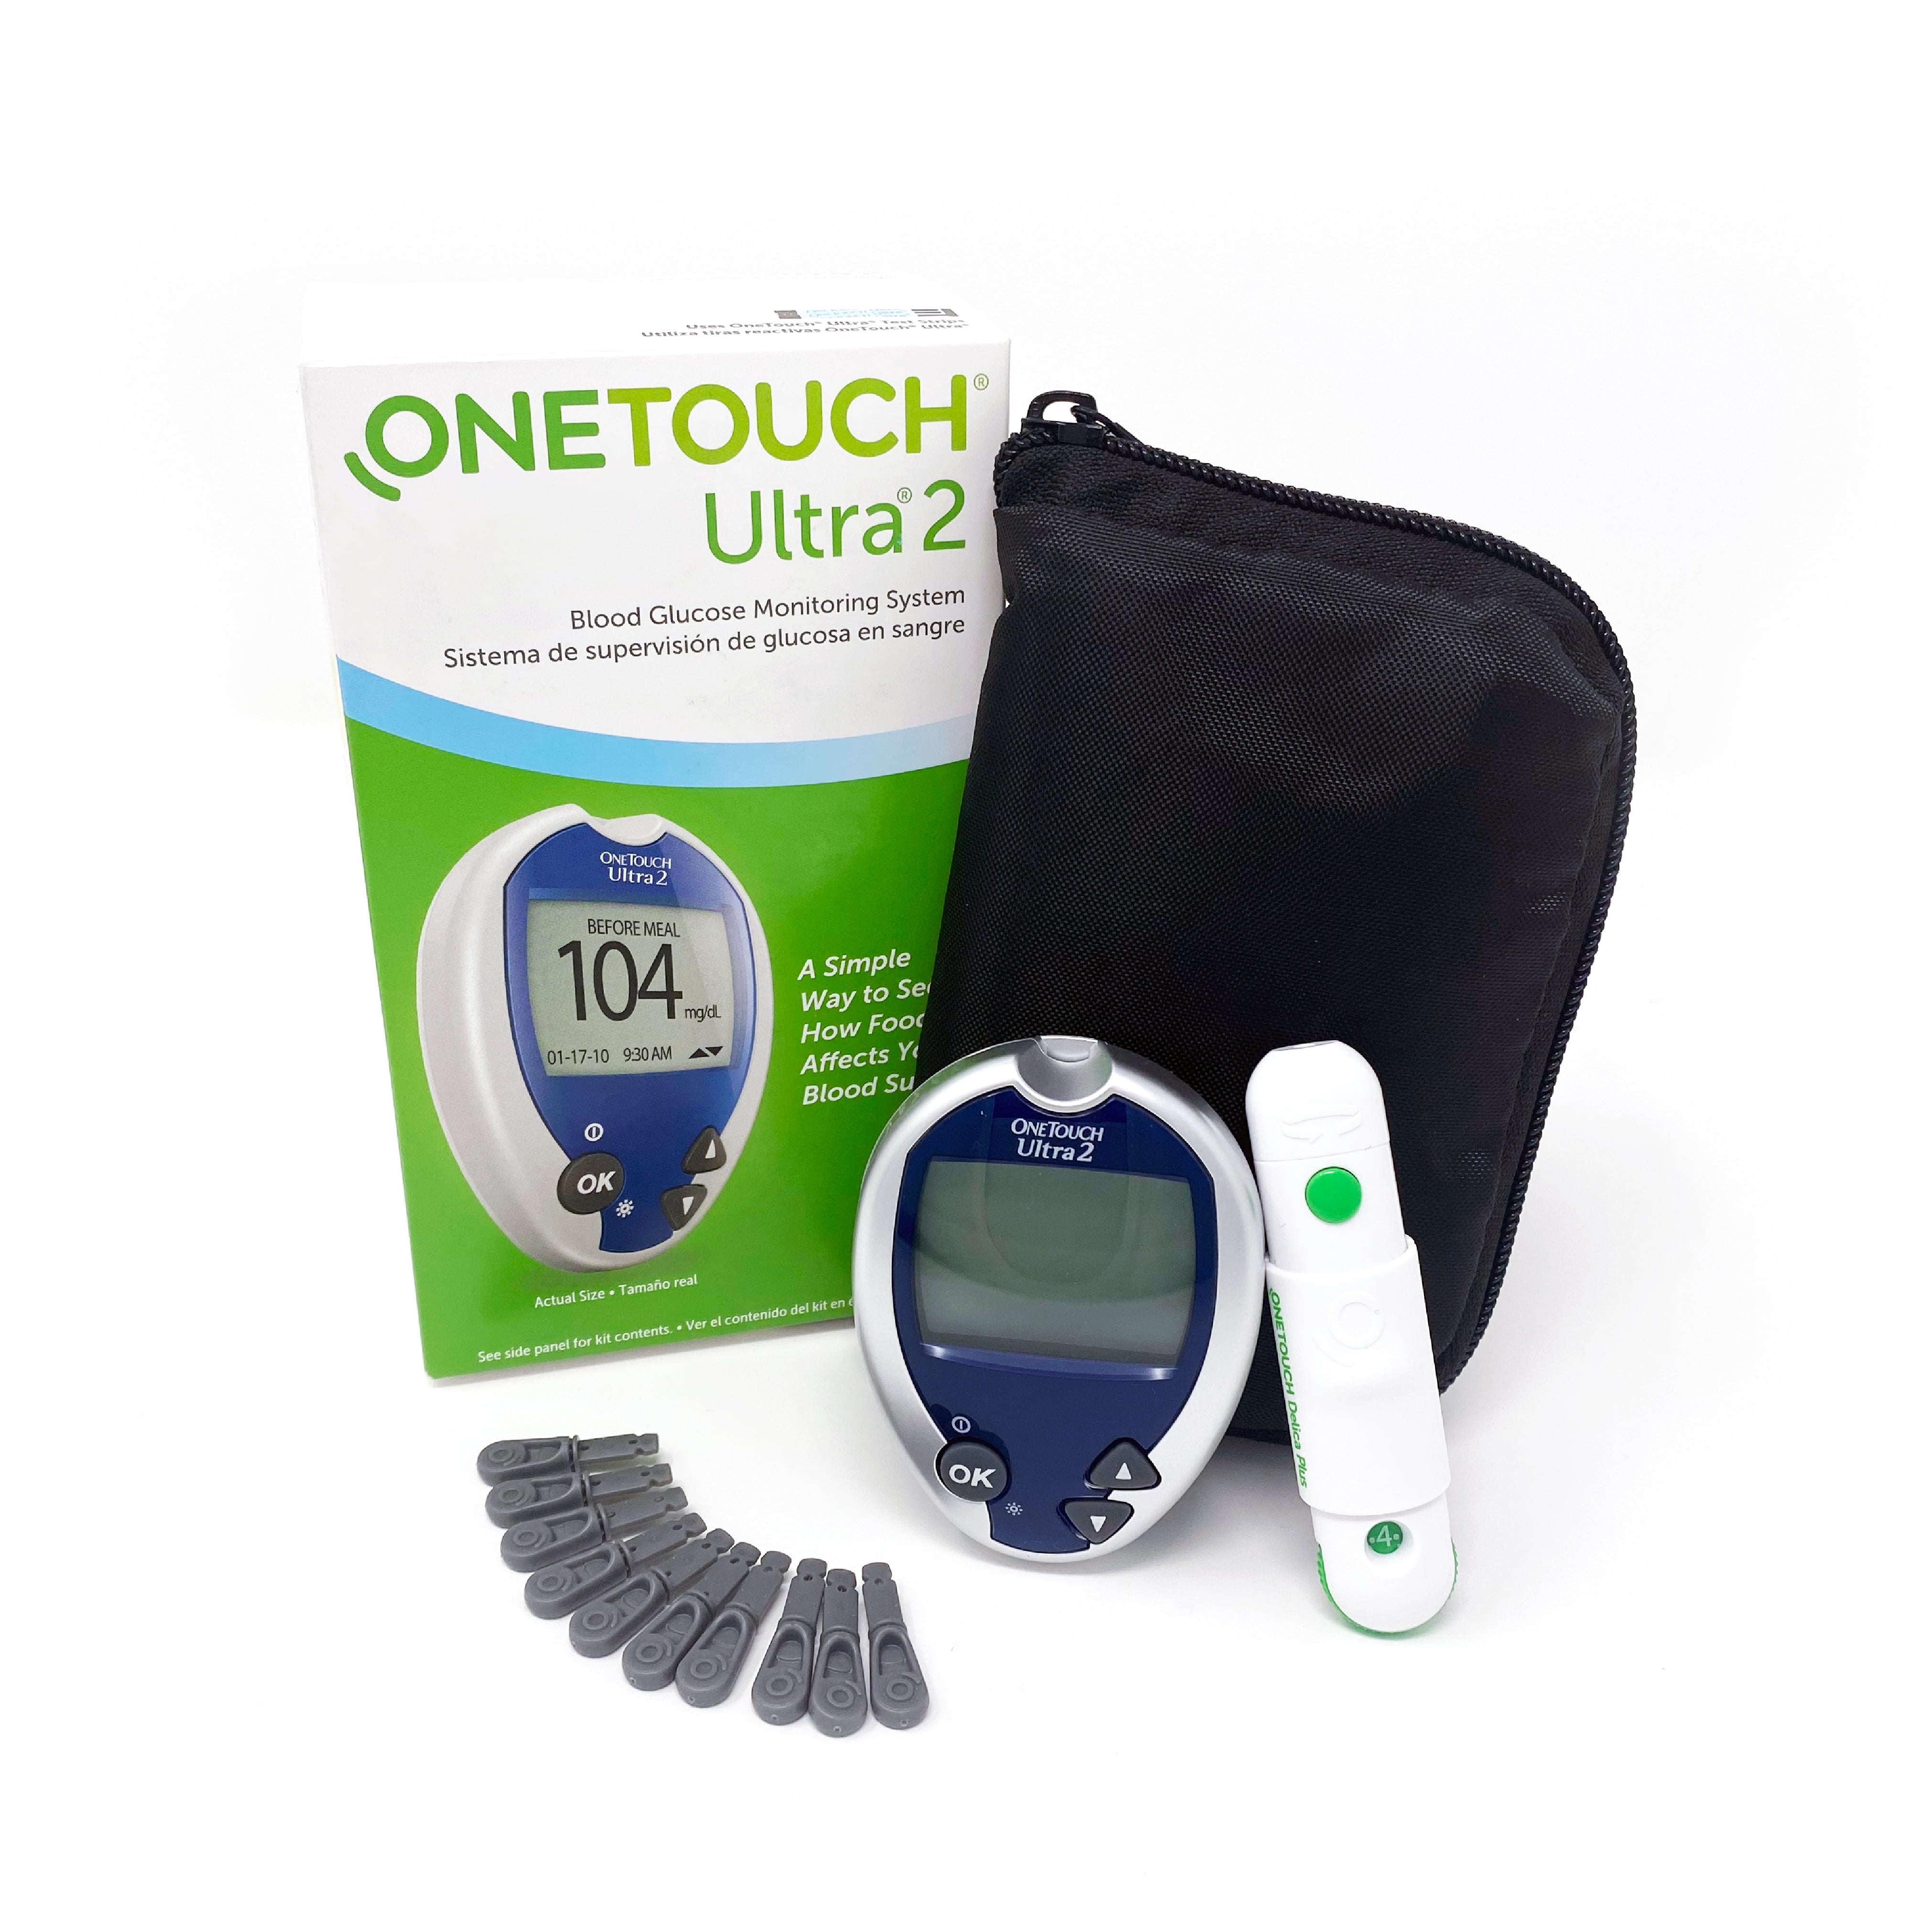 oorsprong Middelen Verslaafde OneTouch Ultra 2 Blood Glucose Meter | Glucose Monitor For Blood Sugar Test  Kit | Includes Blood Glucose Monitor, Lancing Device, 10 Sterile Lancets,  and Carrying Case - Walmart.com